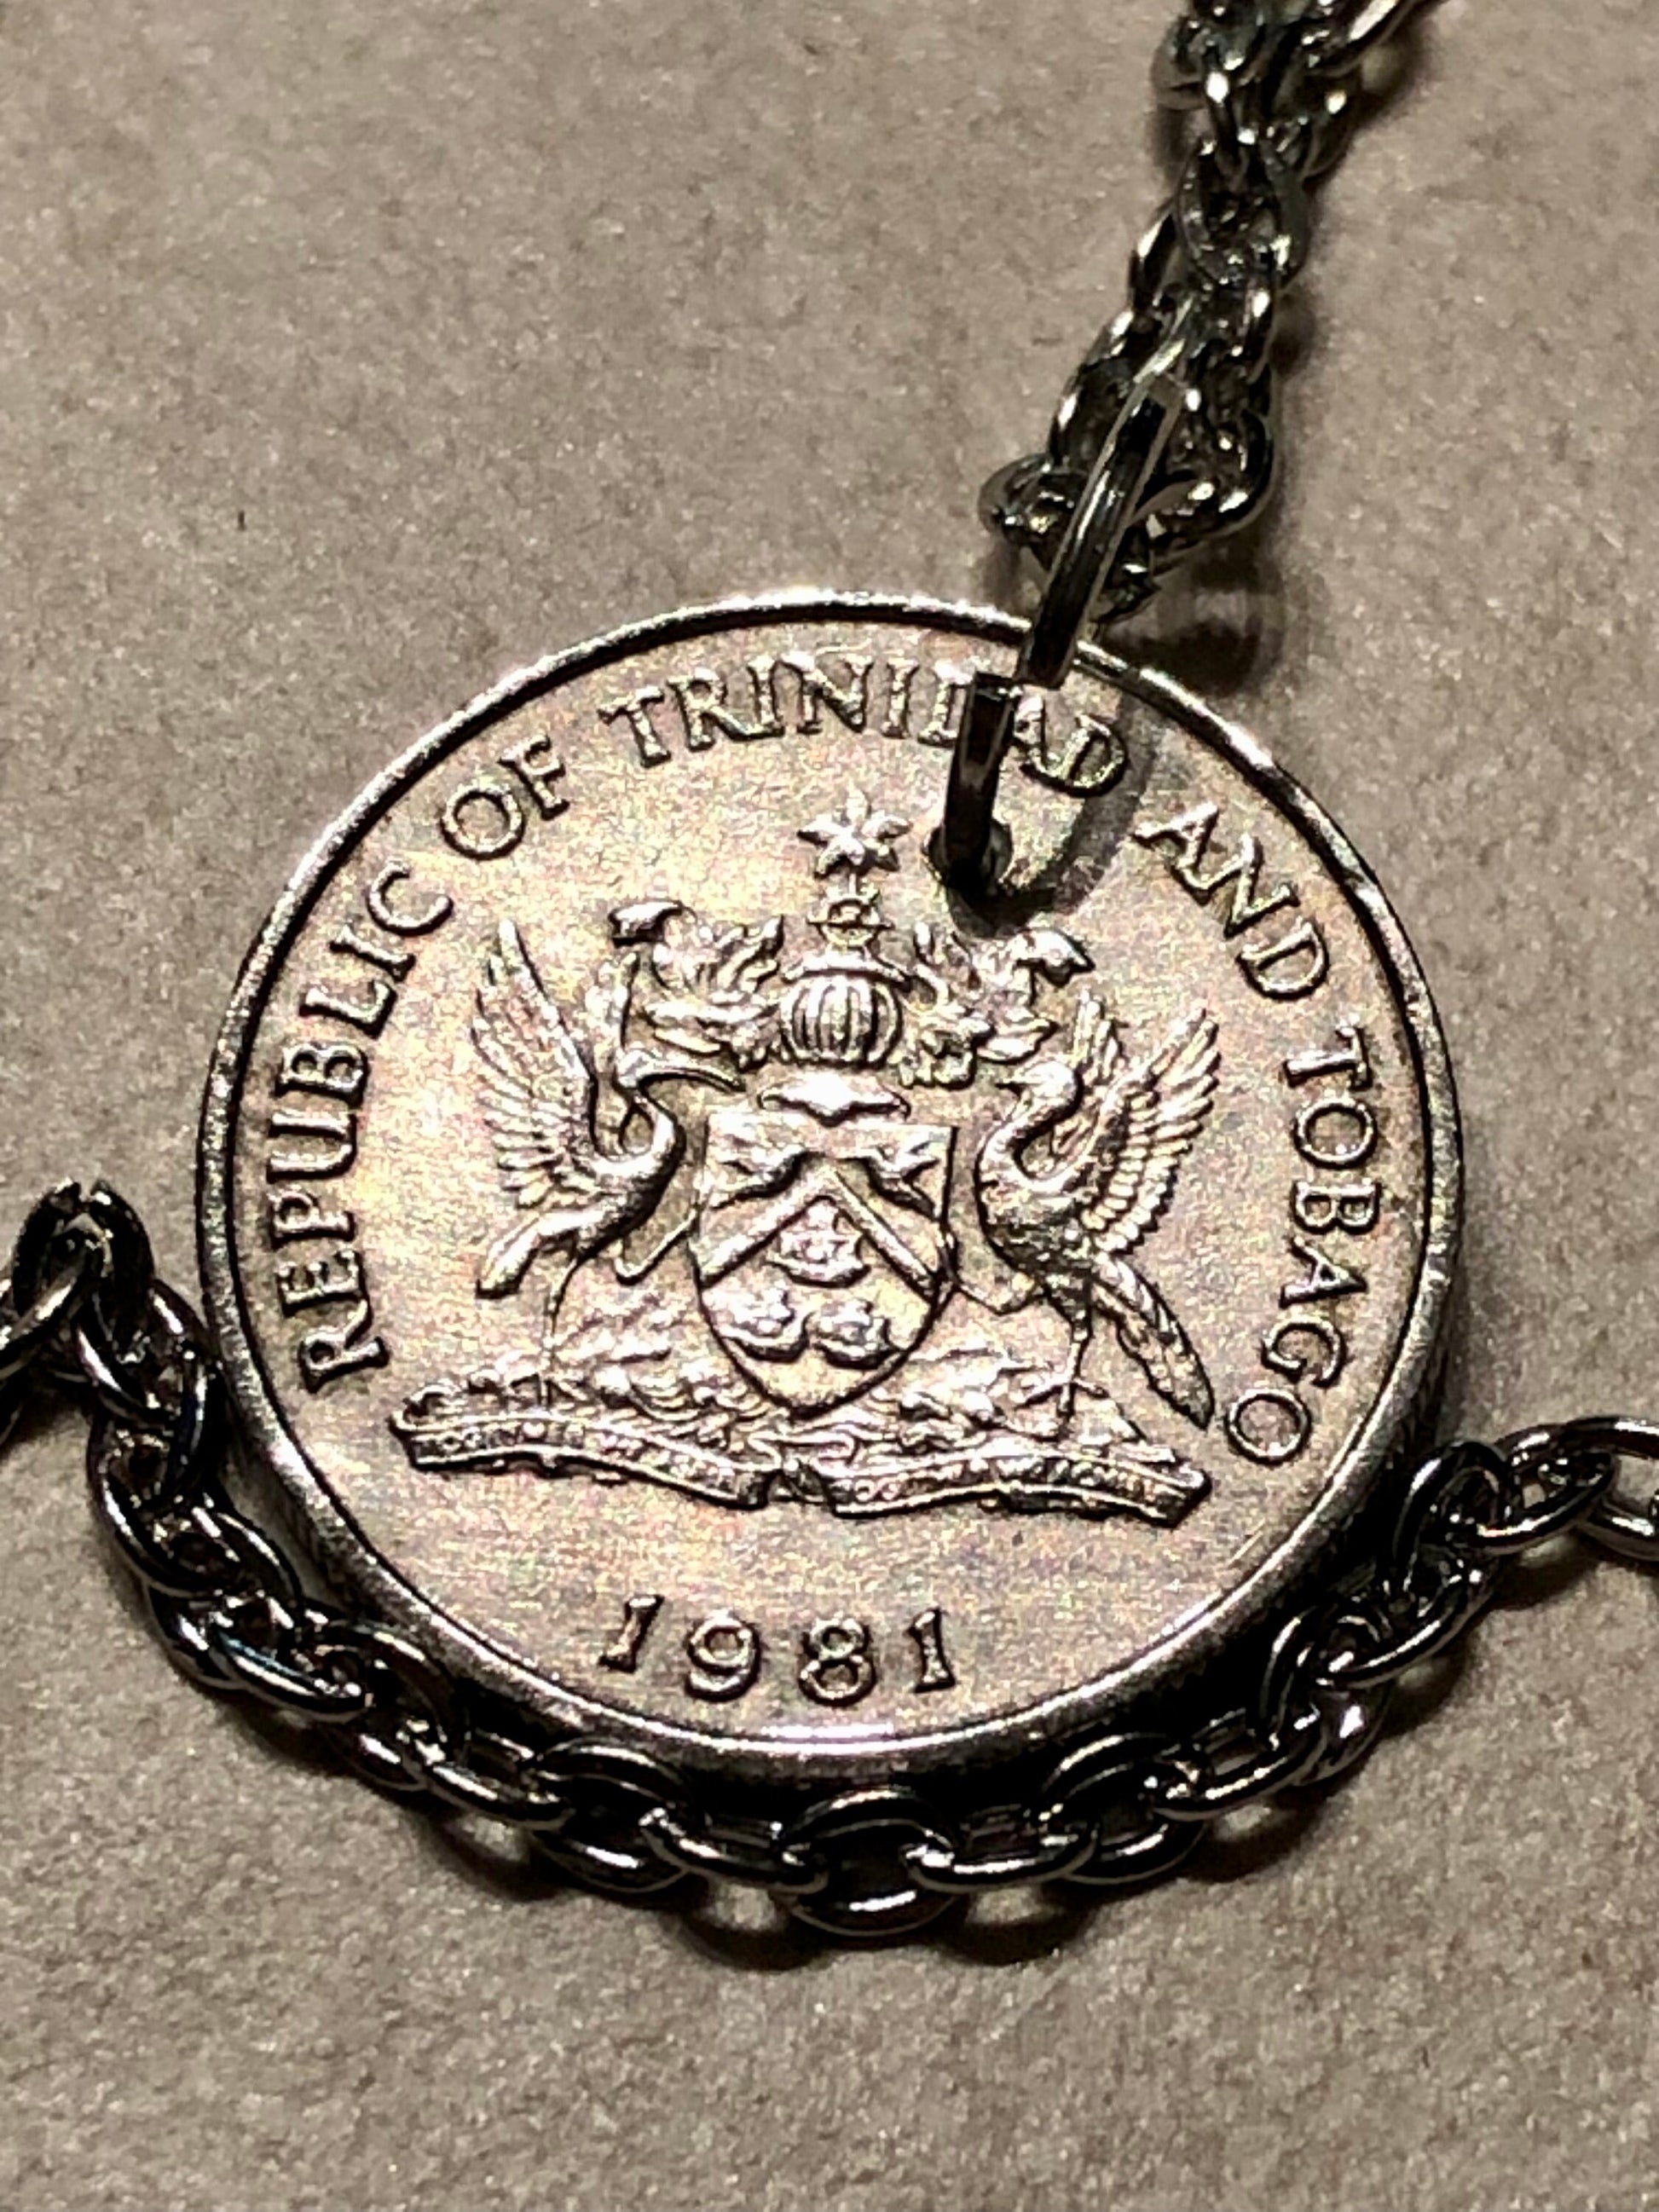 Trinidad and Tobago Coin Necklace 25 Cents Pendant Vintage Custom Made Rare Coins Coin Enthusiast Fashion Accessory Handmade